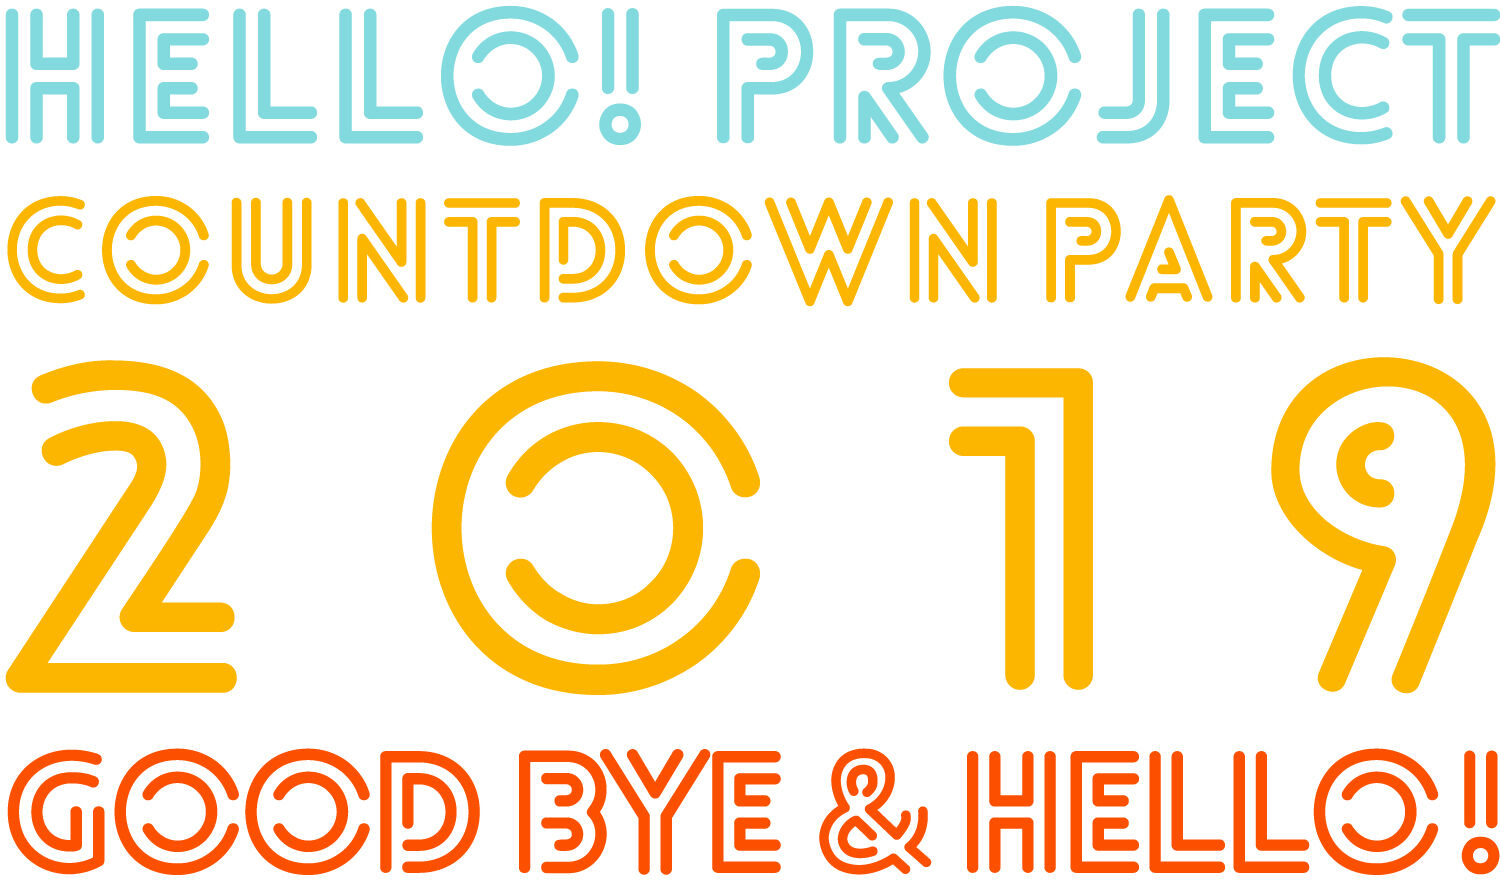 Hello！ Project COUNTDOWN PARTY 2019 ～GOO-